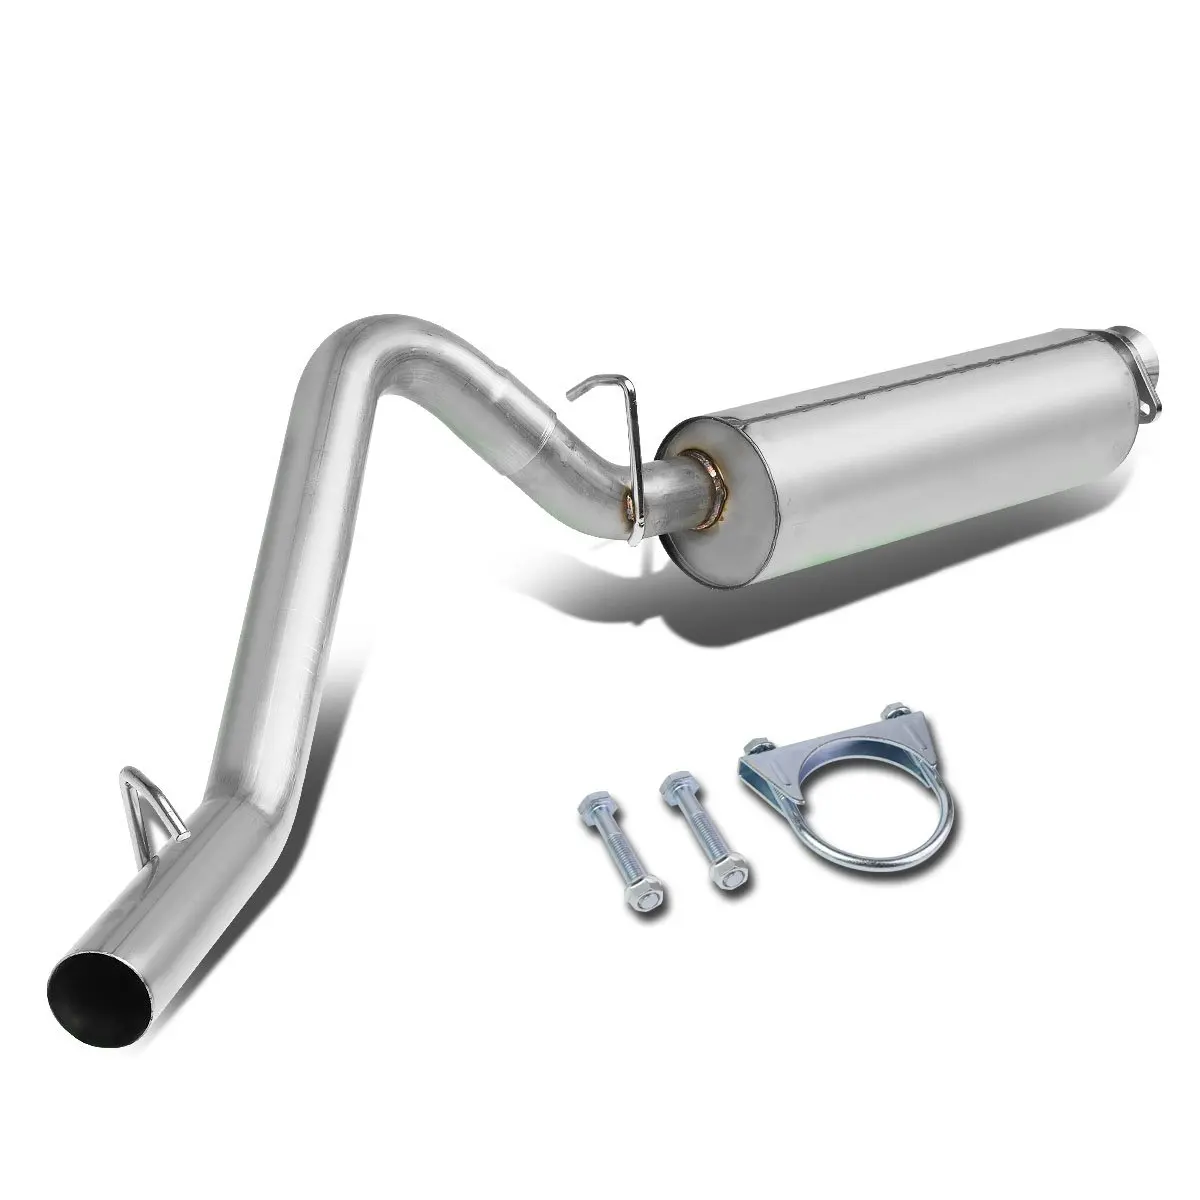 1995 Jeep Wrangler  Exhaust System Sales Discounts, Save 58% |  